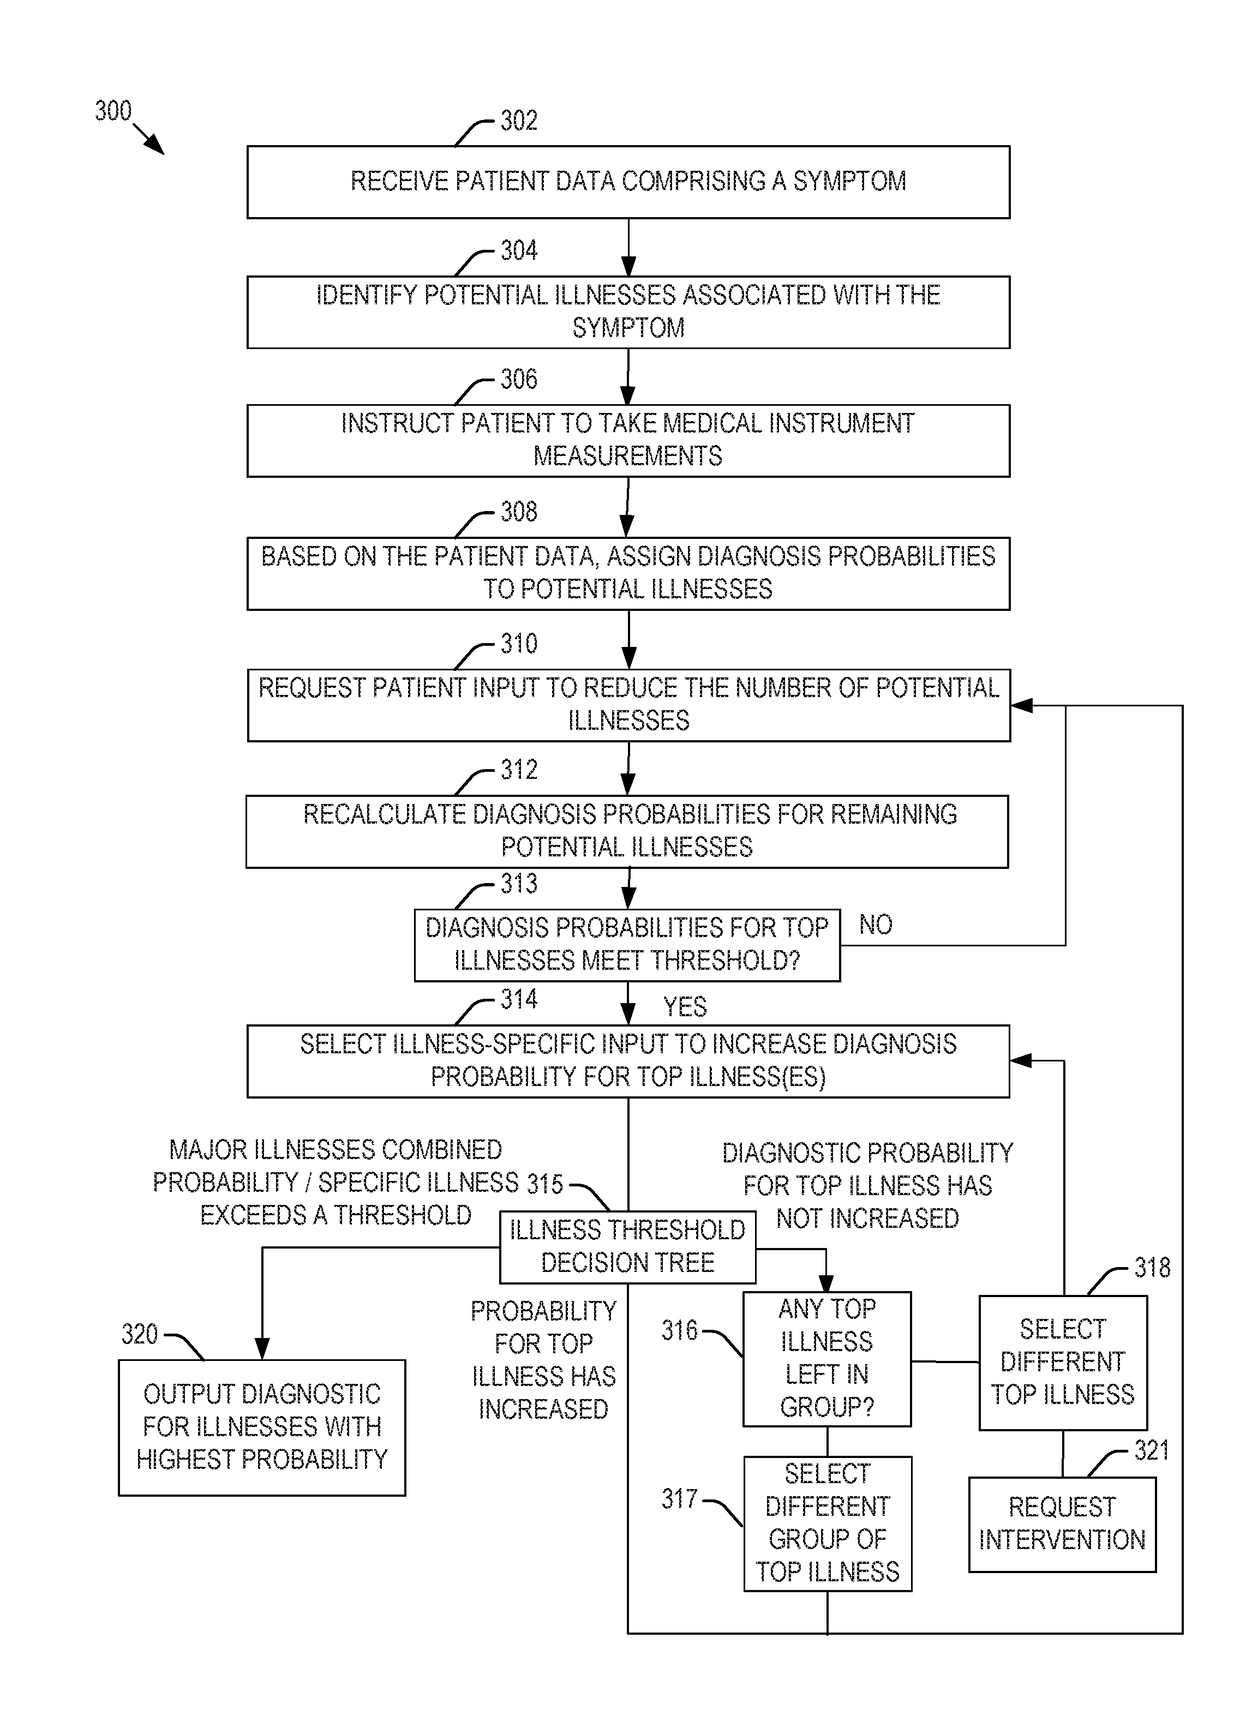 Systems and methods for generating medical diagnosis